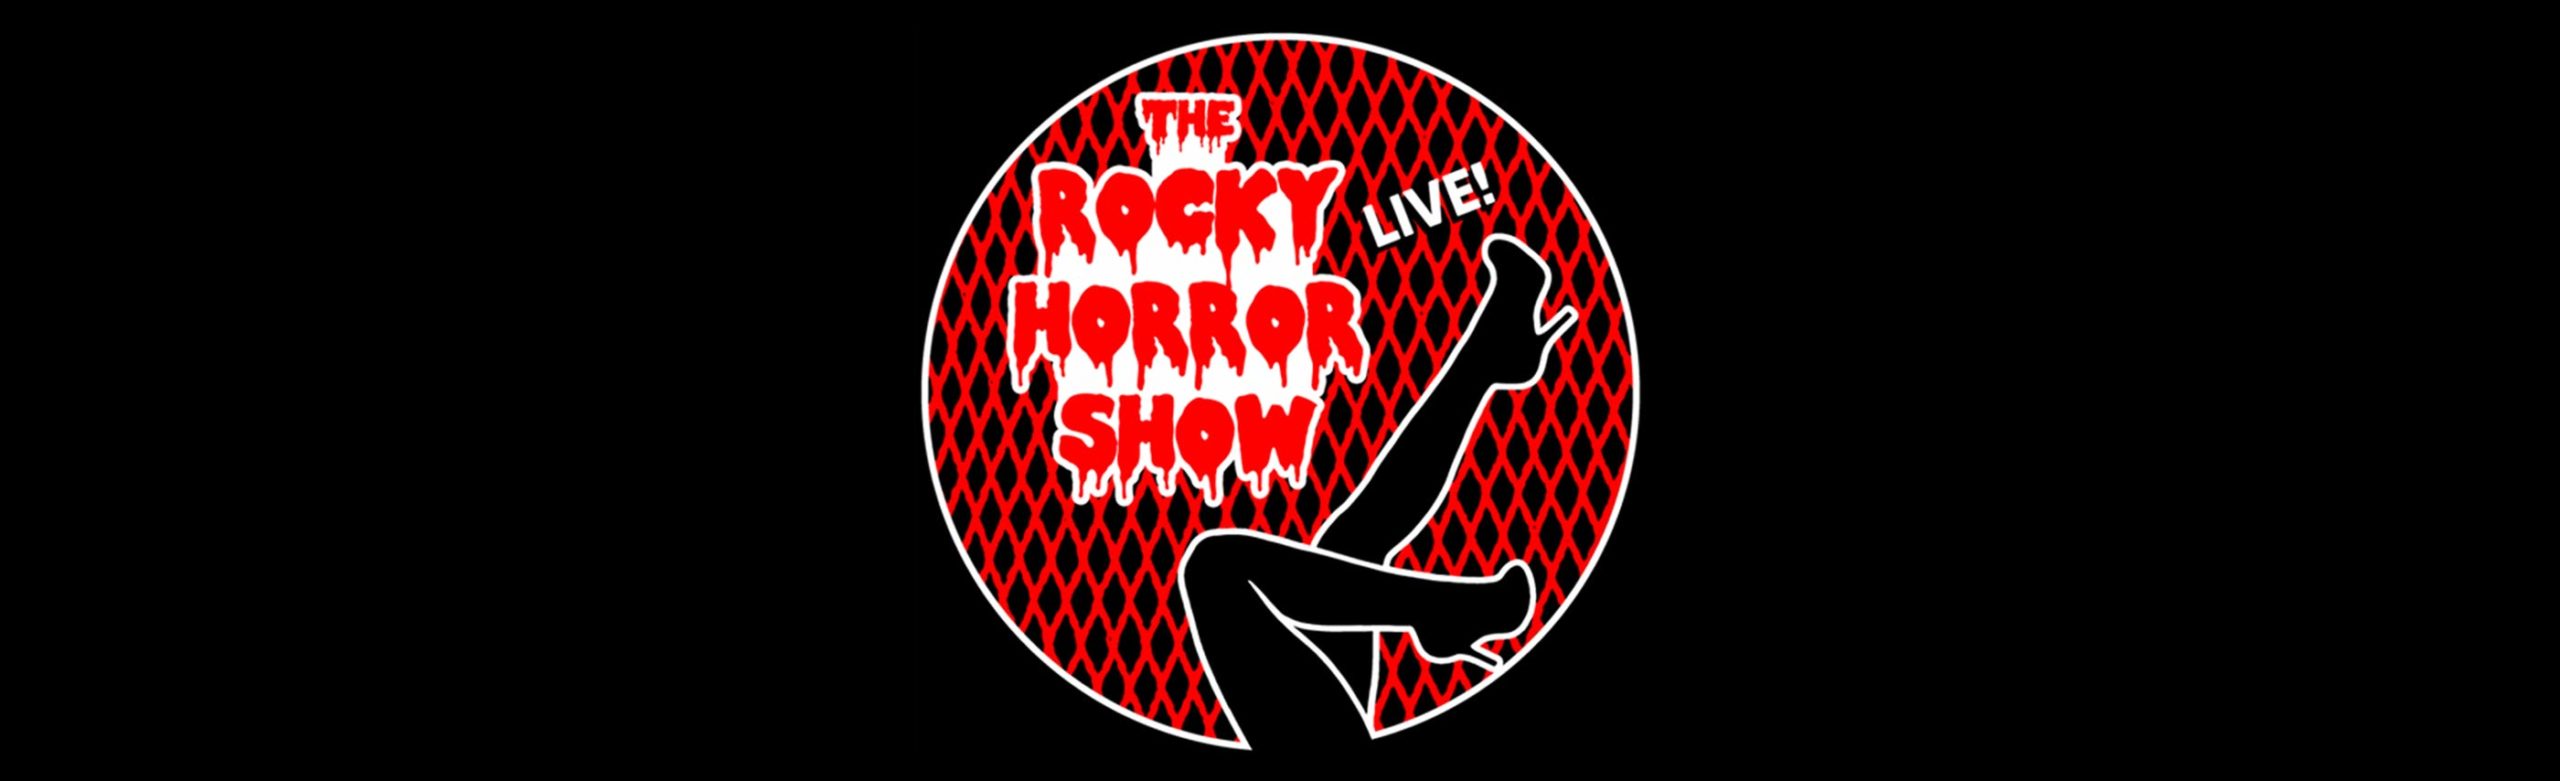 The Rocky Horror Show Live! Will Return to The Wilma in 2022 Image